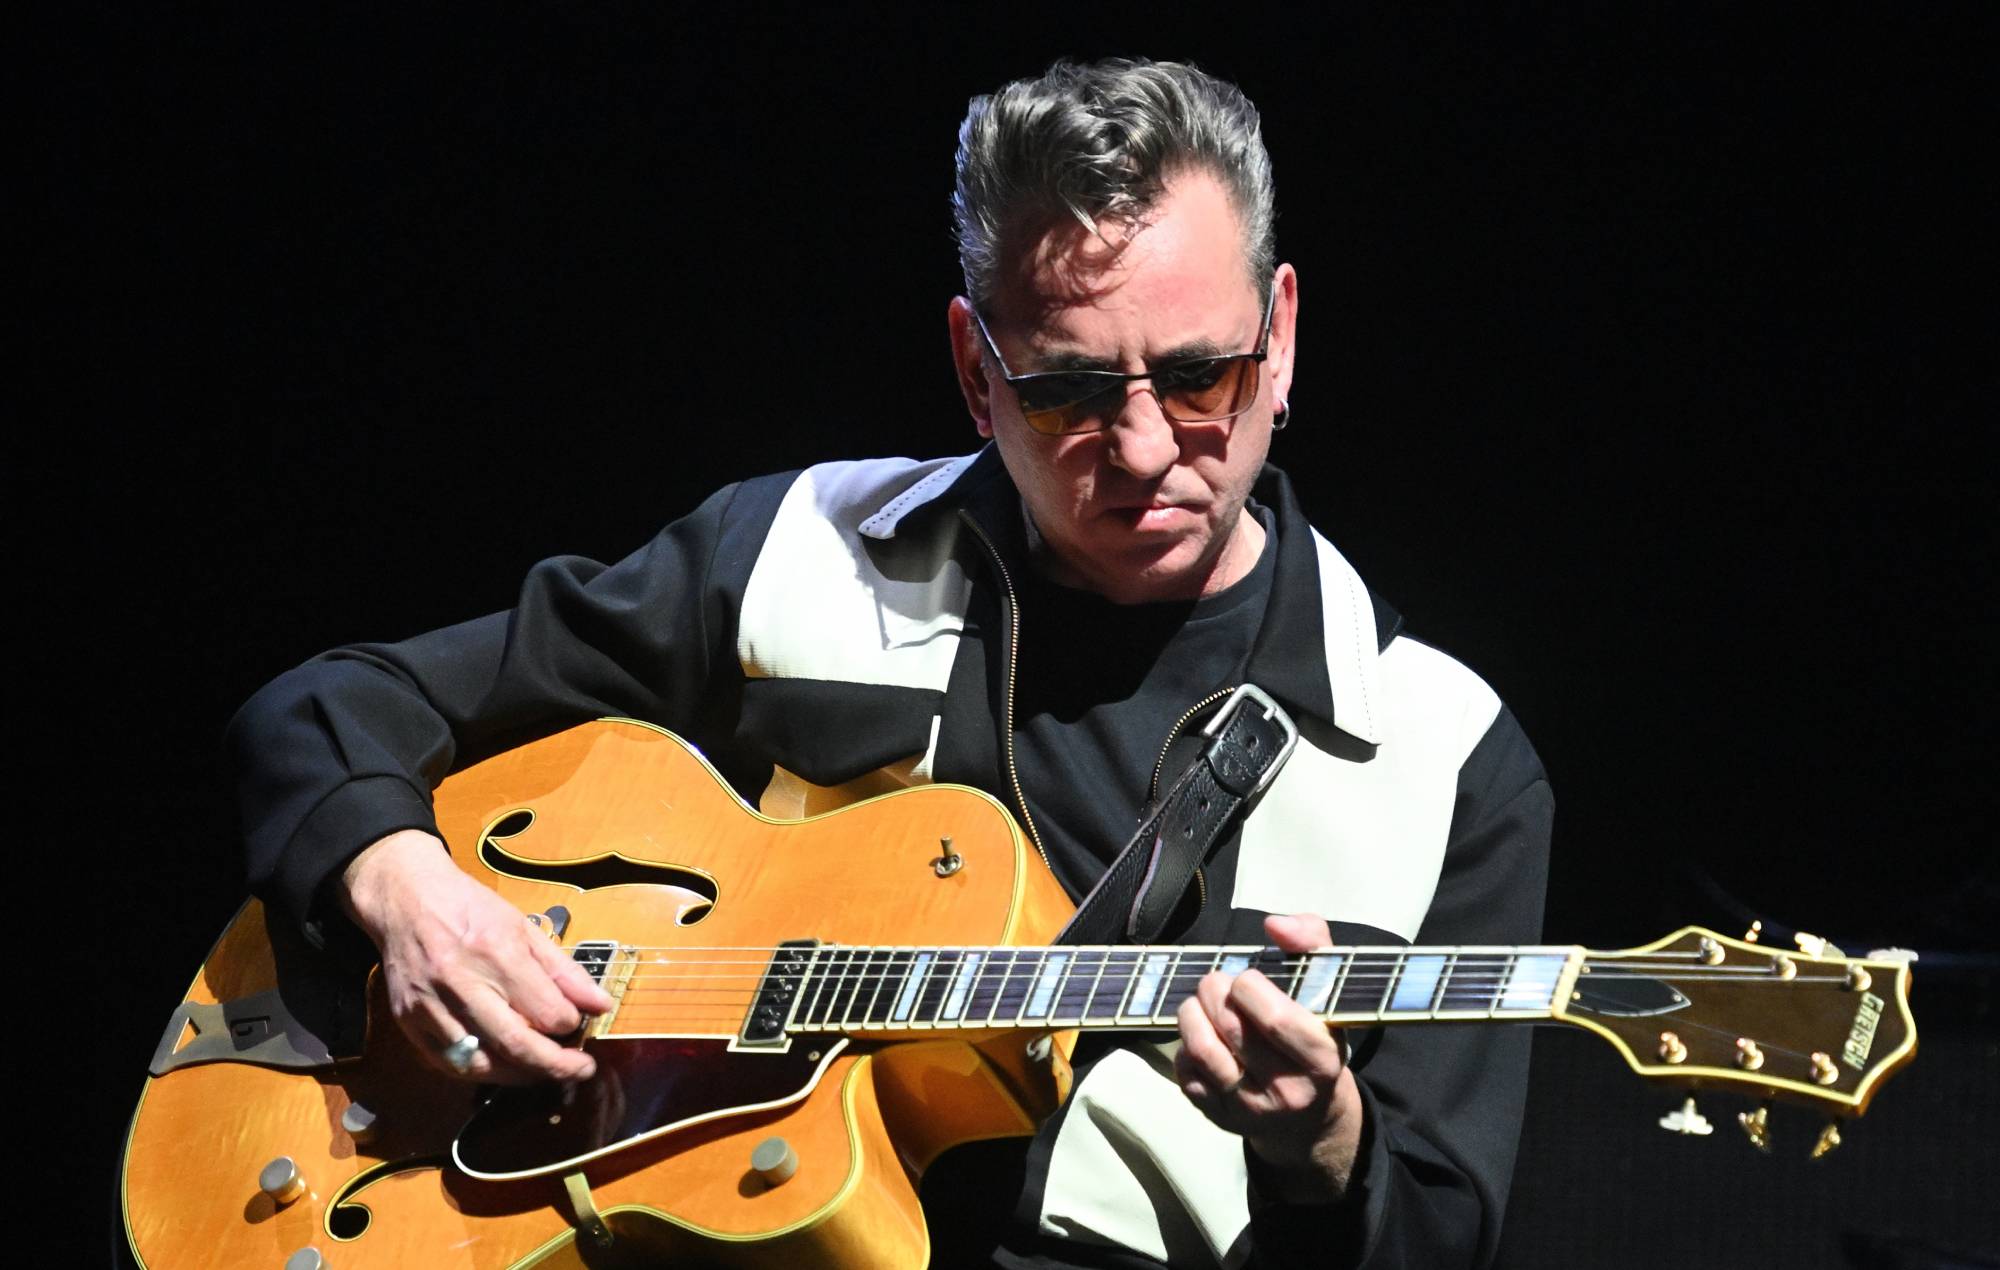 Watch Richard Hawley celebrate new greatest hits album with intimate live set from The Grapes in Sheffield